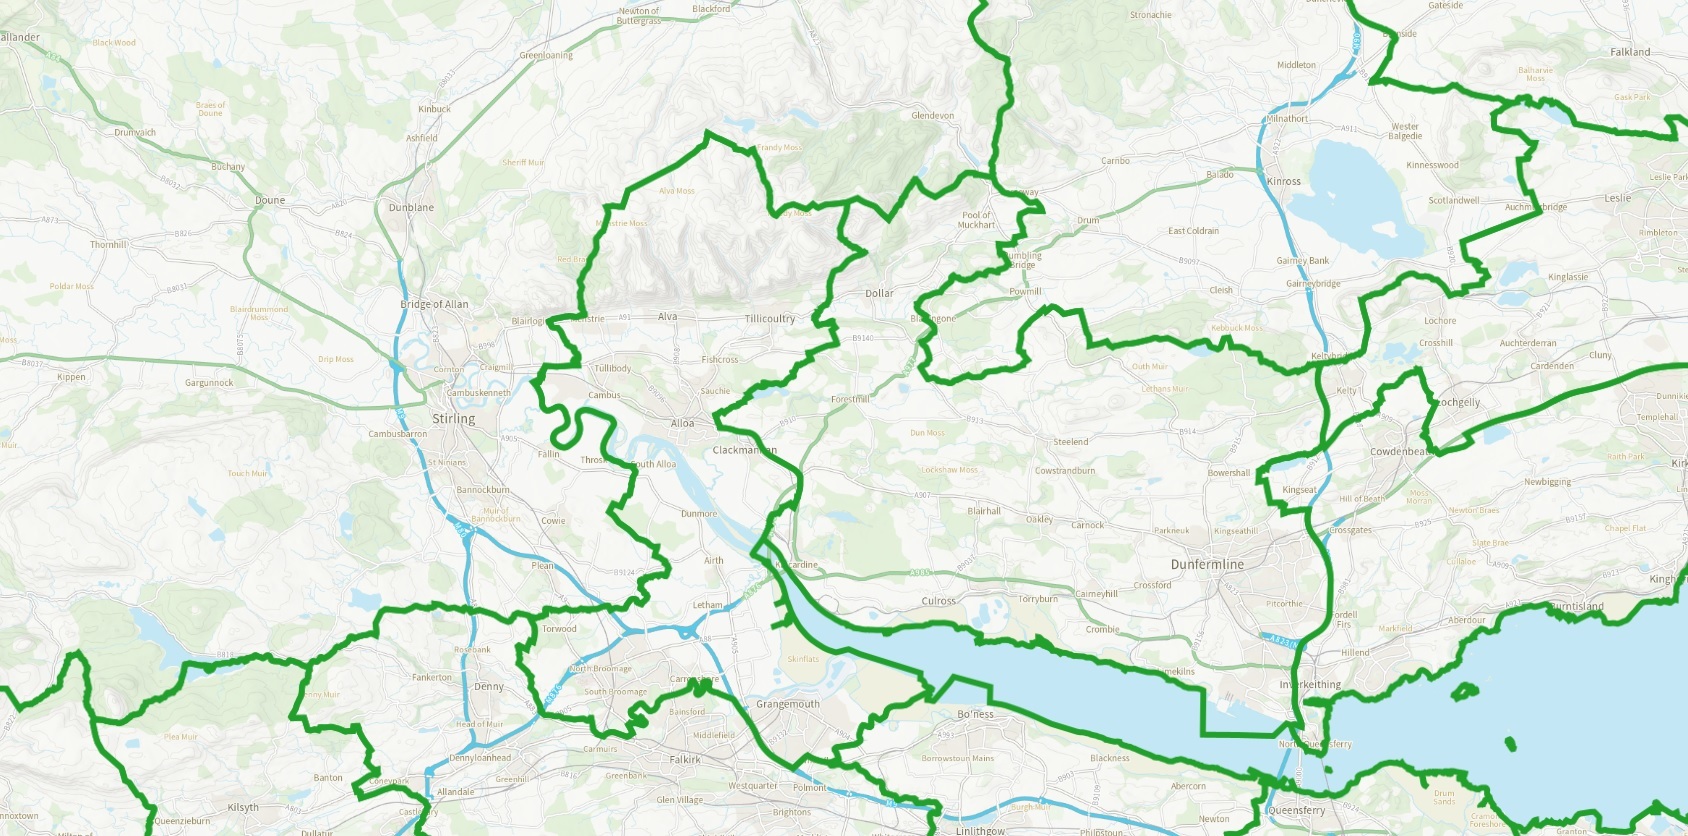 SPLIT: The Boundary Commission changes will cut Clackmannanshire in half.